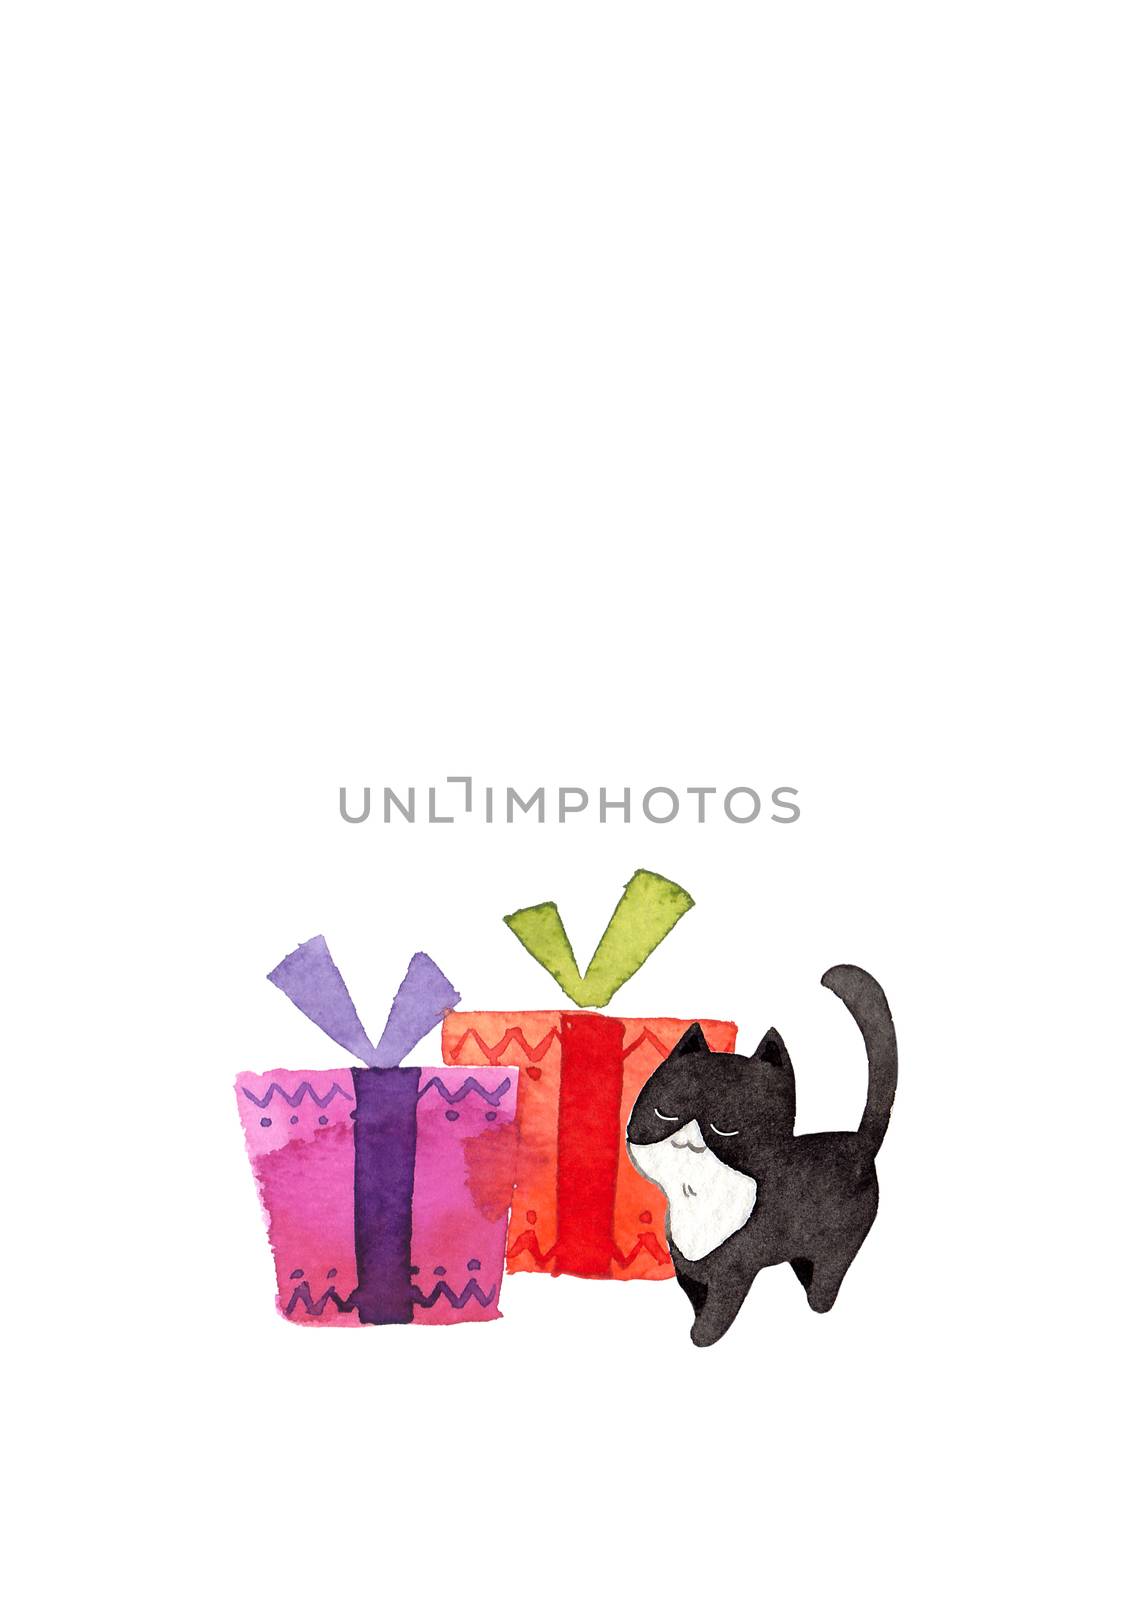 The cat is pushing the gift box. Watercolor hand painting illustration on white background. Copy space for your text. Design for greeting cards, gift cards, Christmas, New year, pet advertising.